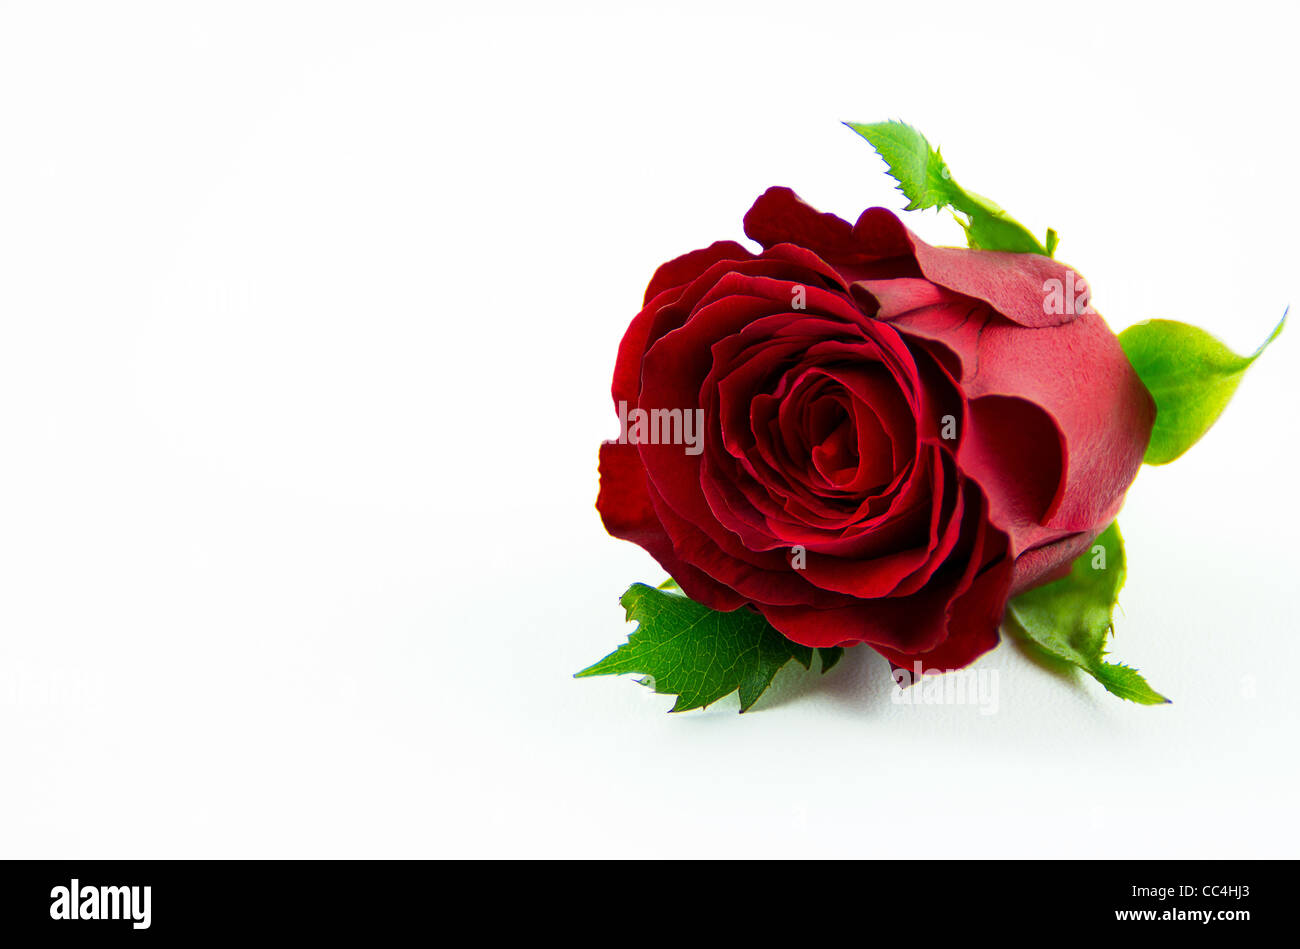 Floral English Single Red Rose Stock Photo